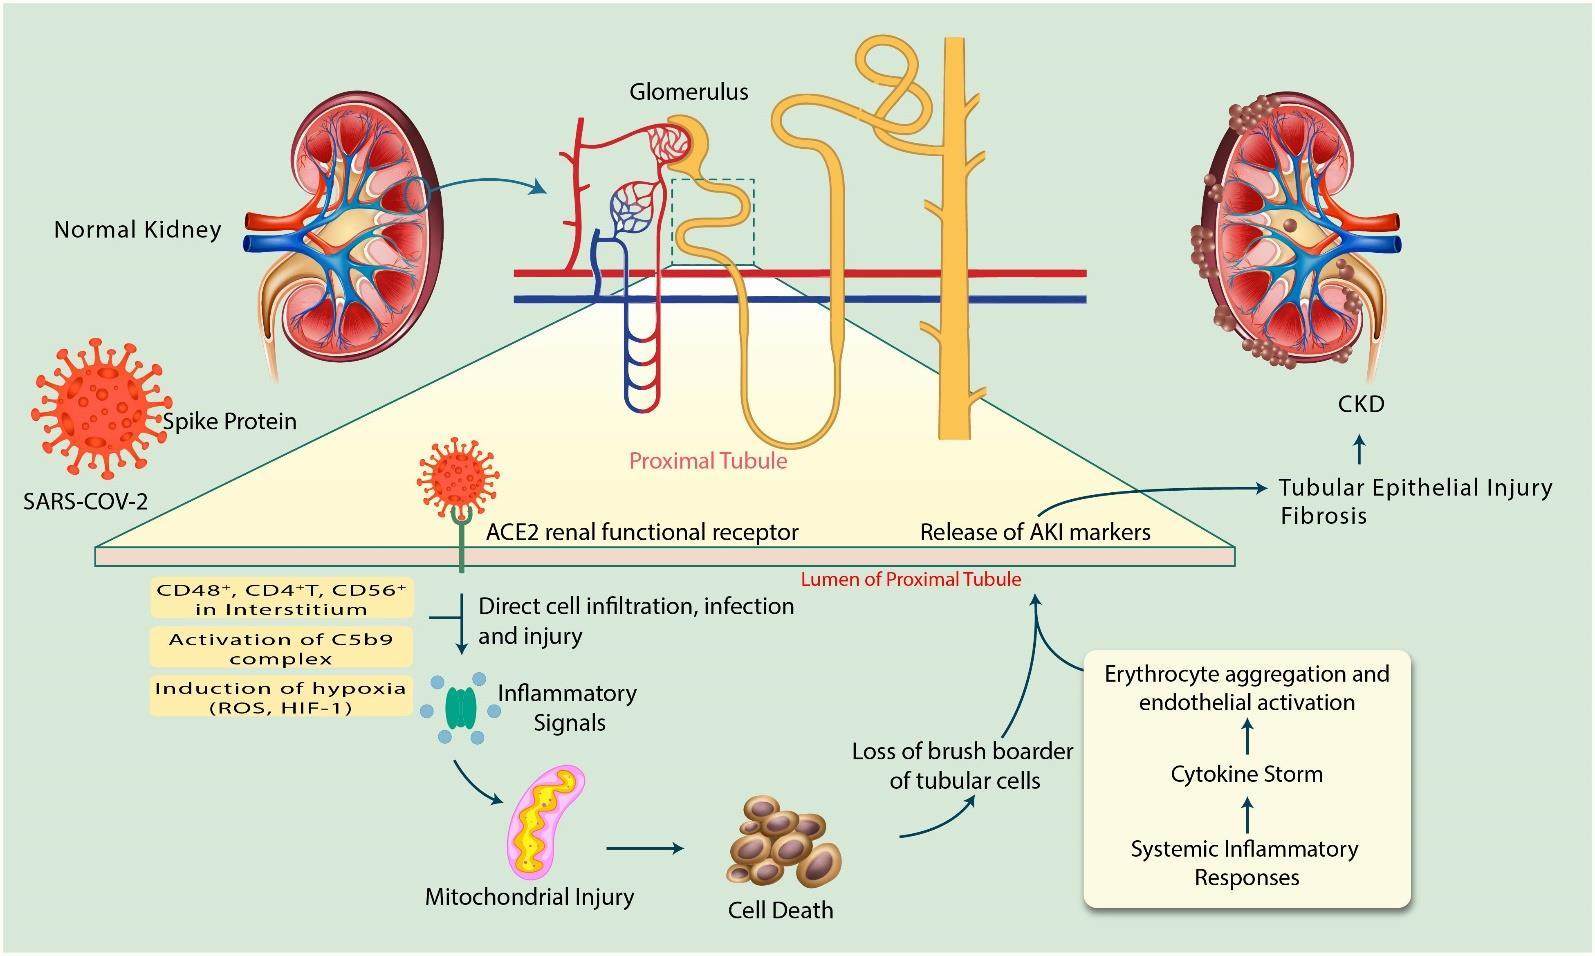 Current knowledge on mechanisms involved in SARS-CoV-2 infection and kidney diseases